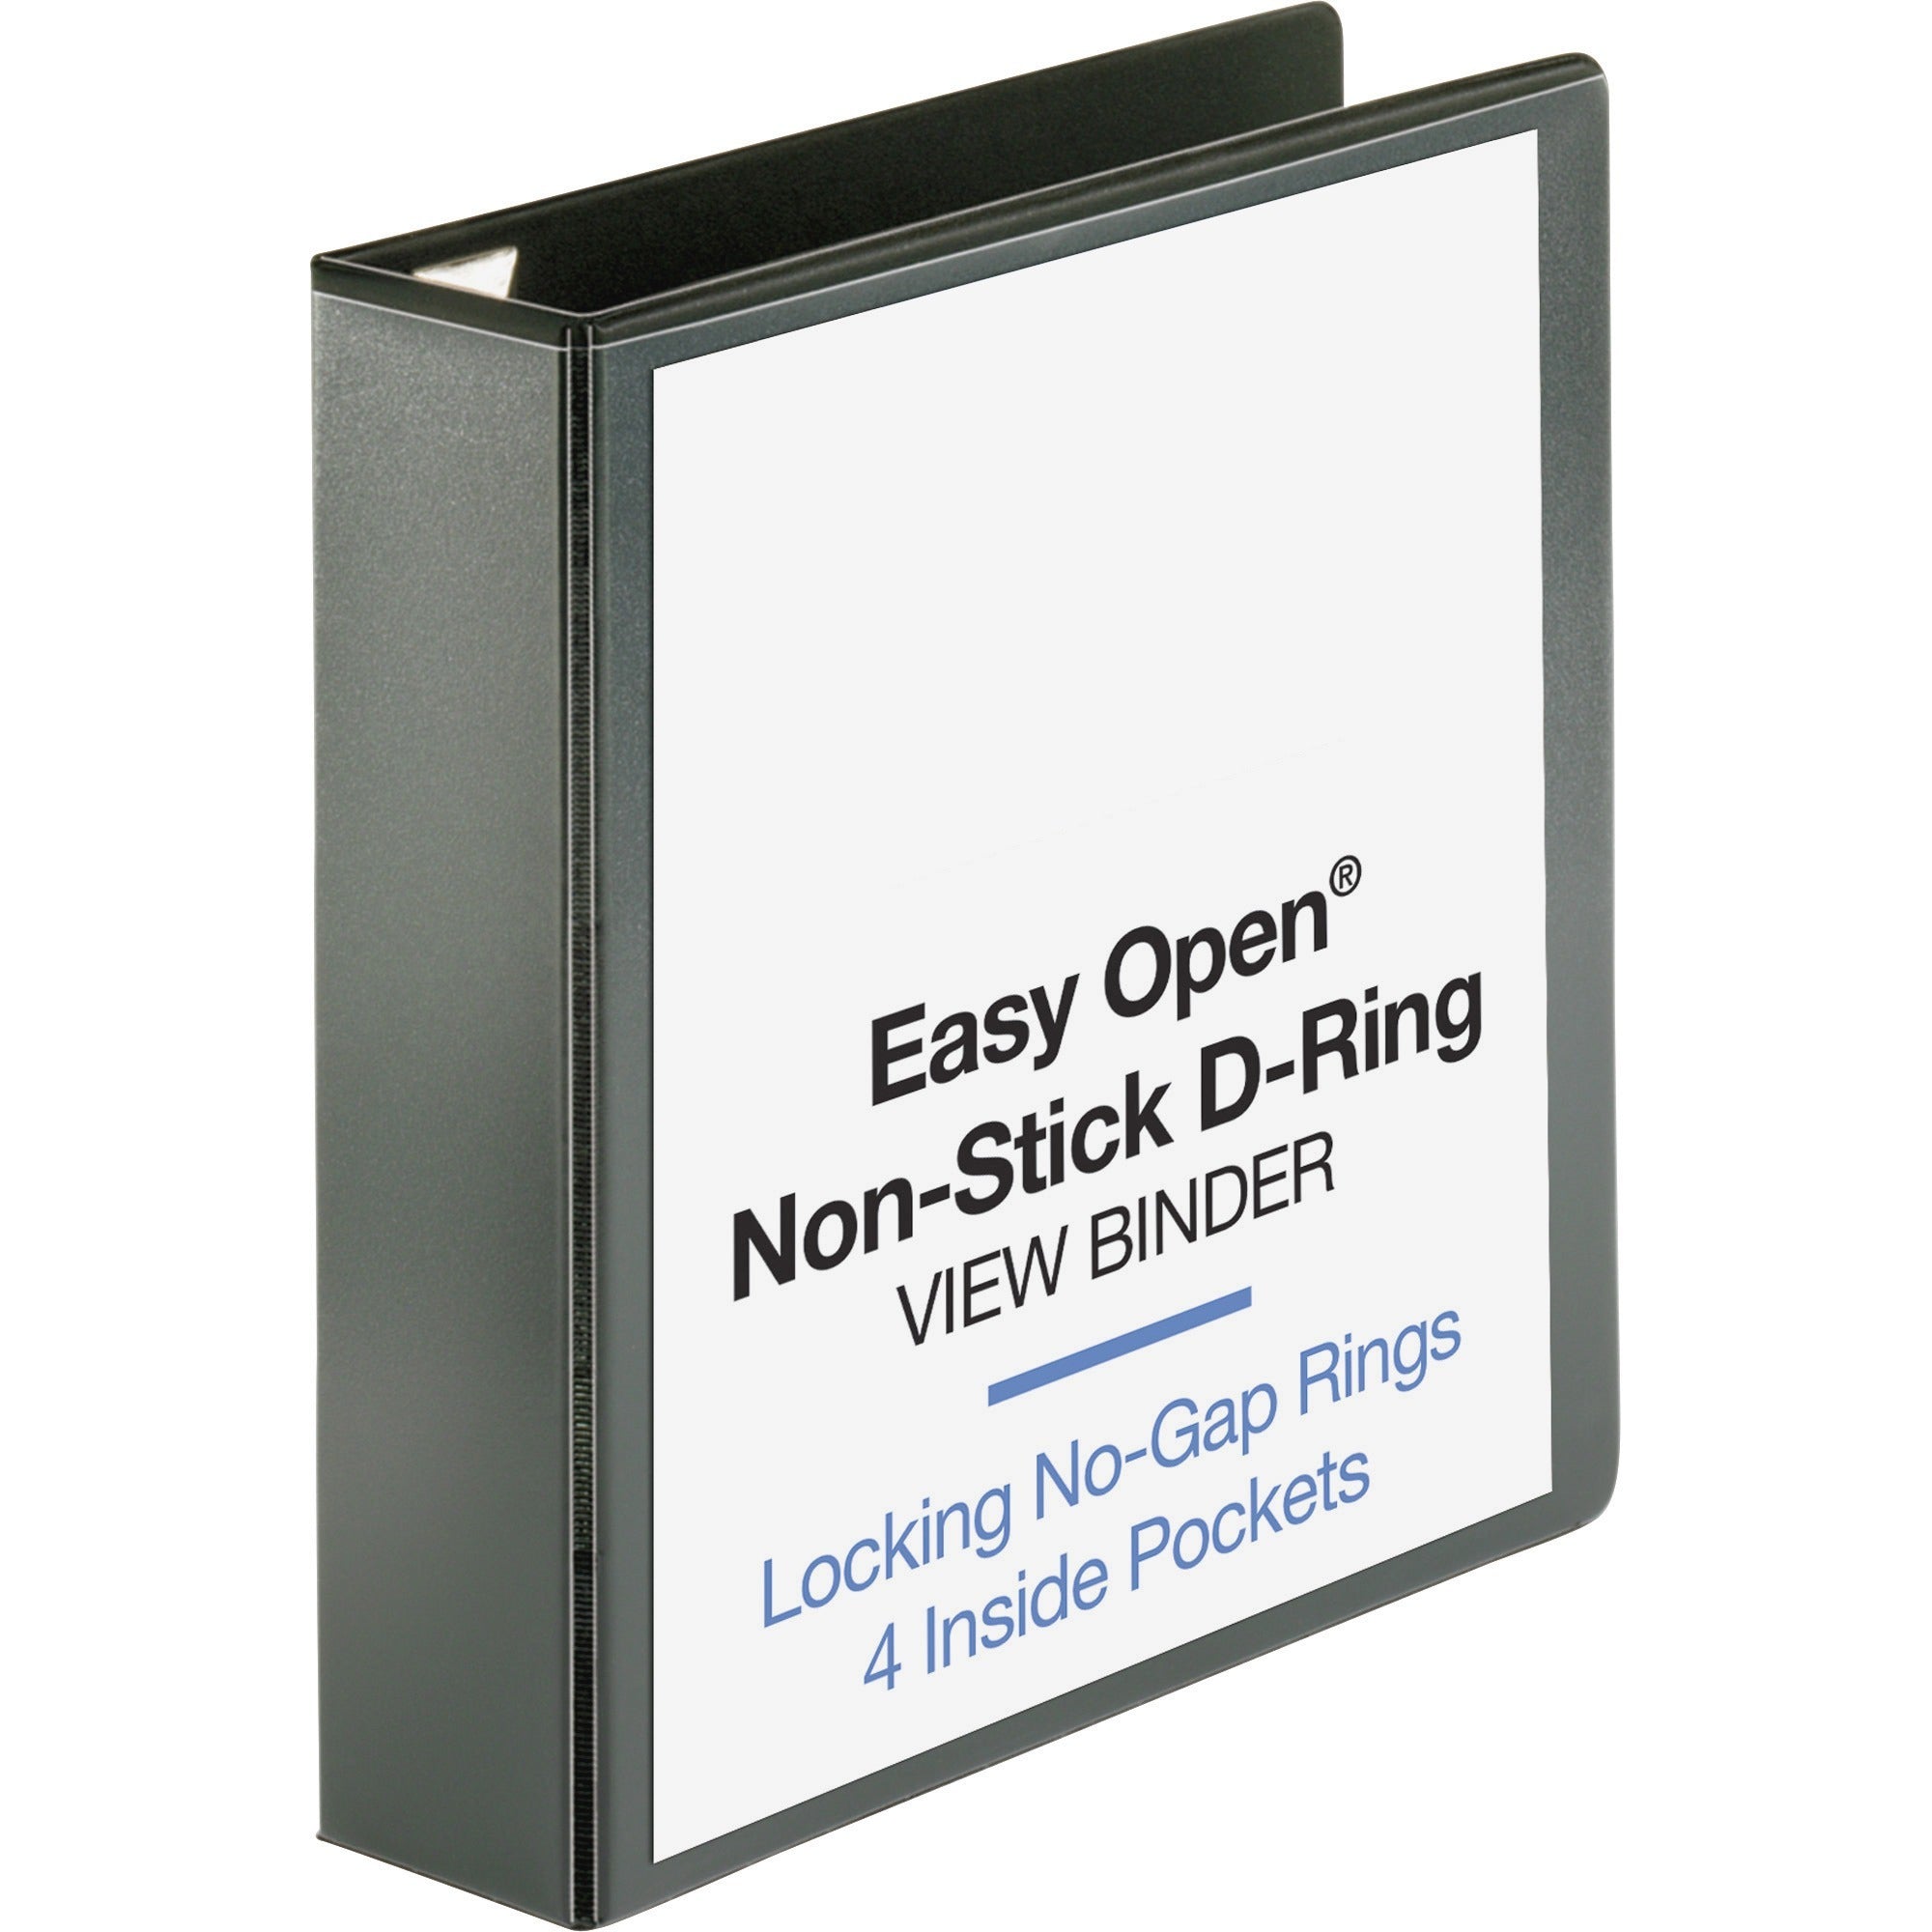 business-source-locking-d-ring-view-binder-2-binder-capacity-letter-8-1-2-x-11-sheet-size-500-sheet-capacity-d-ring-fasteners-4-inside-front-&-back-pockets-polypropylene-chipboard-black-recycled-locking-ring-clear-overlay_bsn26960 - 1